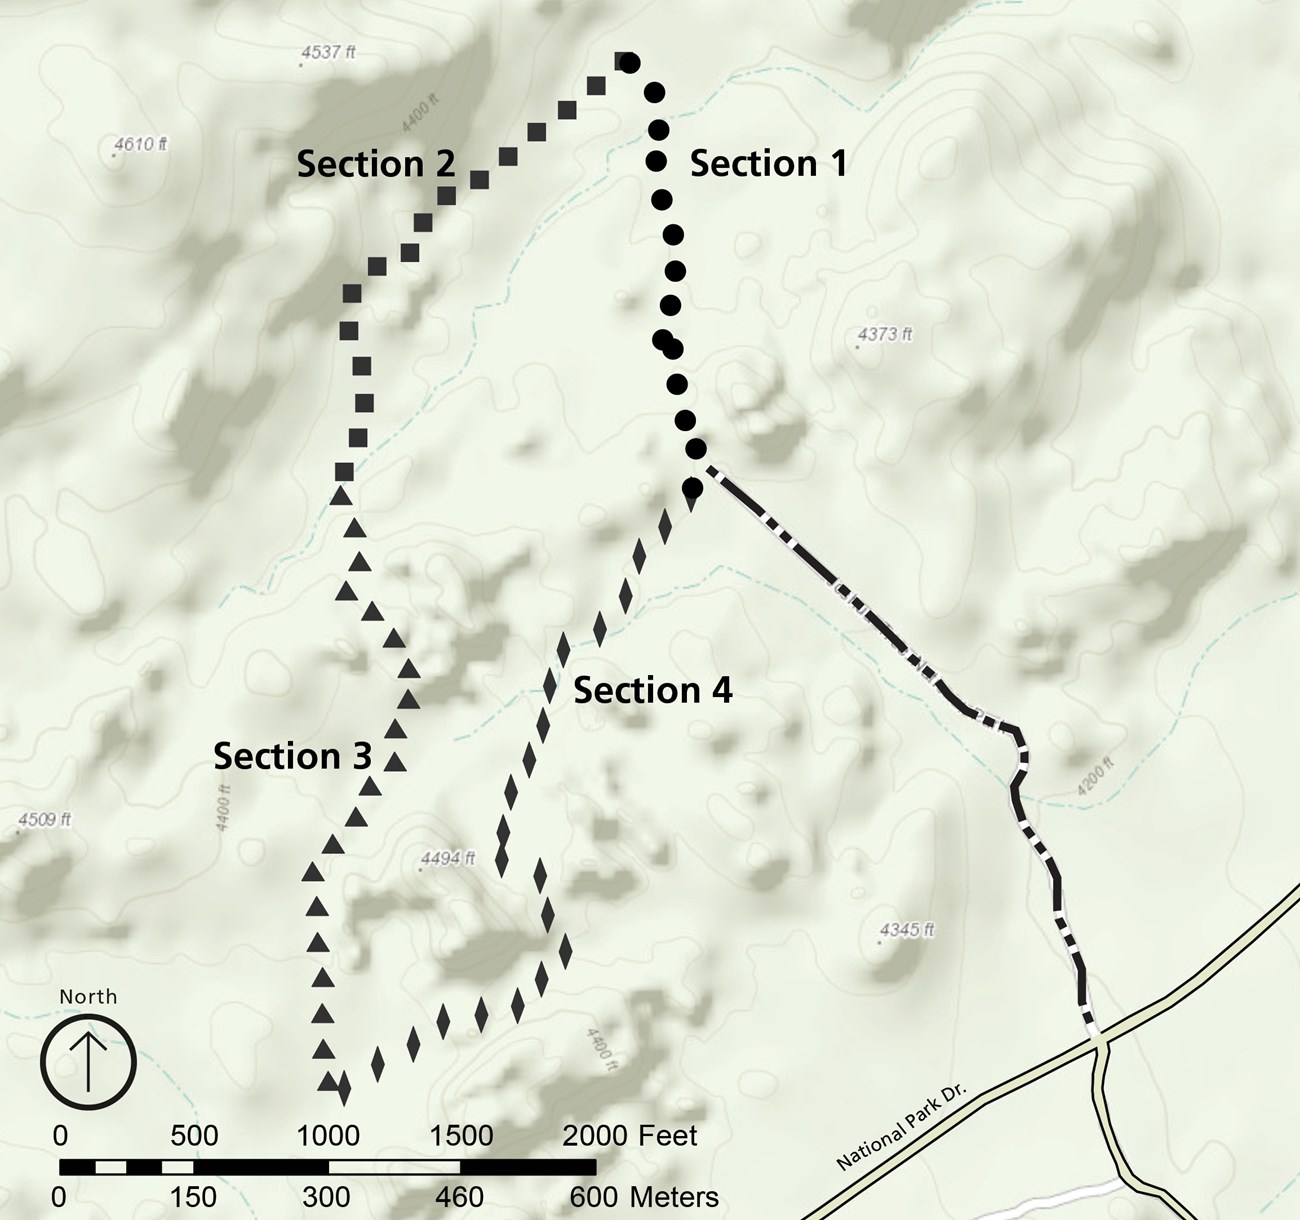 Map of the Split Rock area. The trail makes a loop, with a spur that goes to the road. Starting from where the spur meets the loop, at approximately 3 o'clock on a clock face, the trail moves counter-clockwise through sections 1-4, each 1/4 of the total.